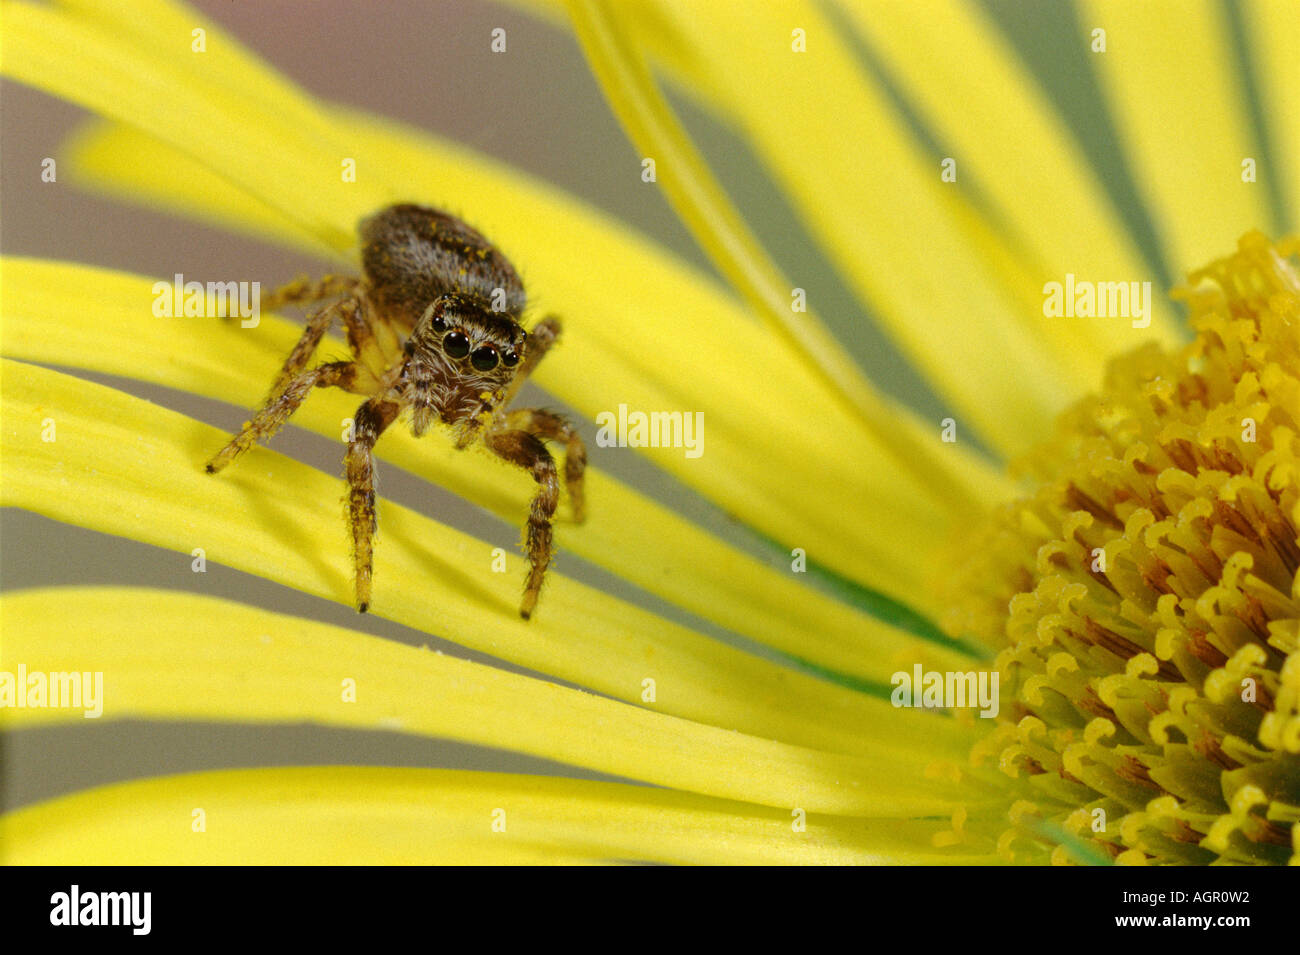 Thomisidae / Springspinne Banque D'Images